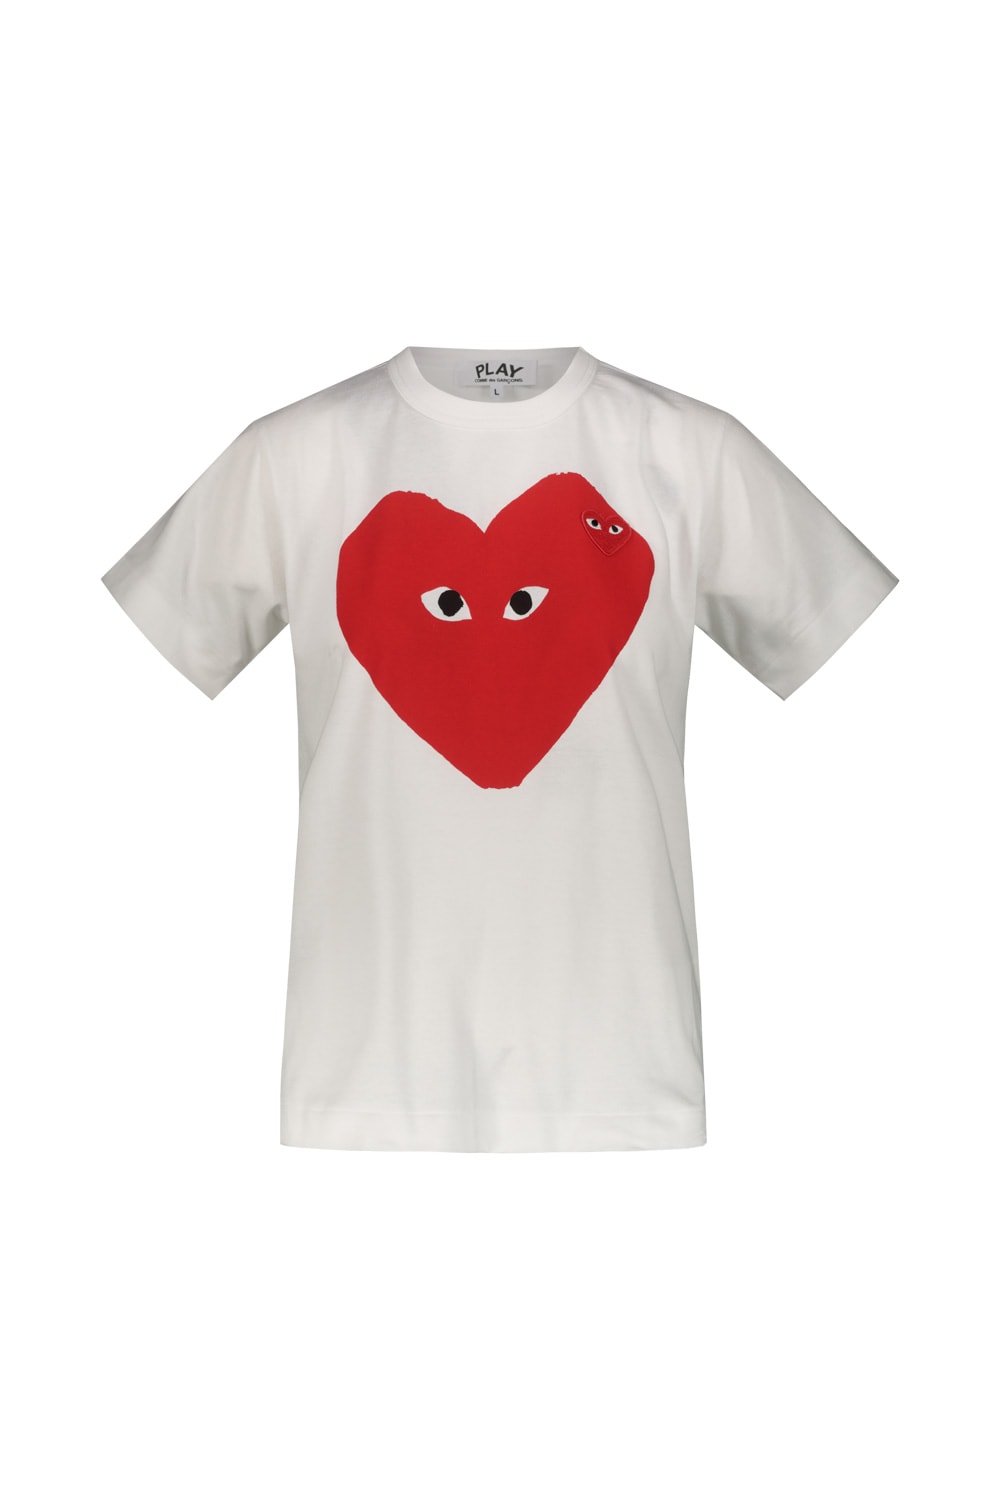 Comme Des Garçons Play White T-shirt With Printed Red Heart In Blk